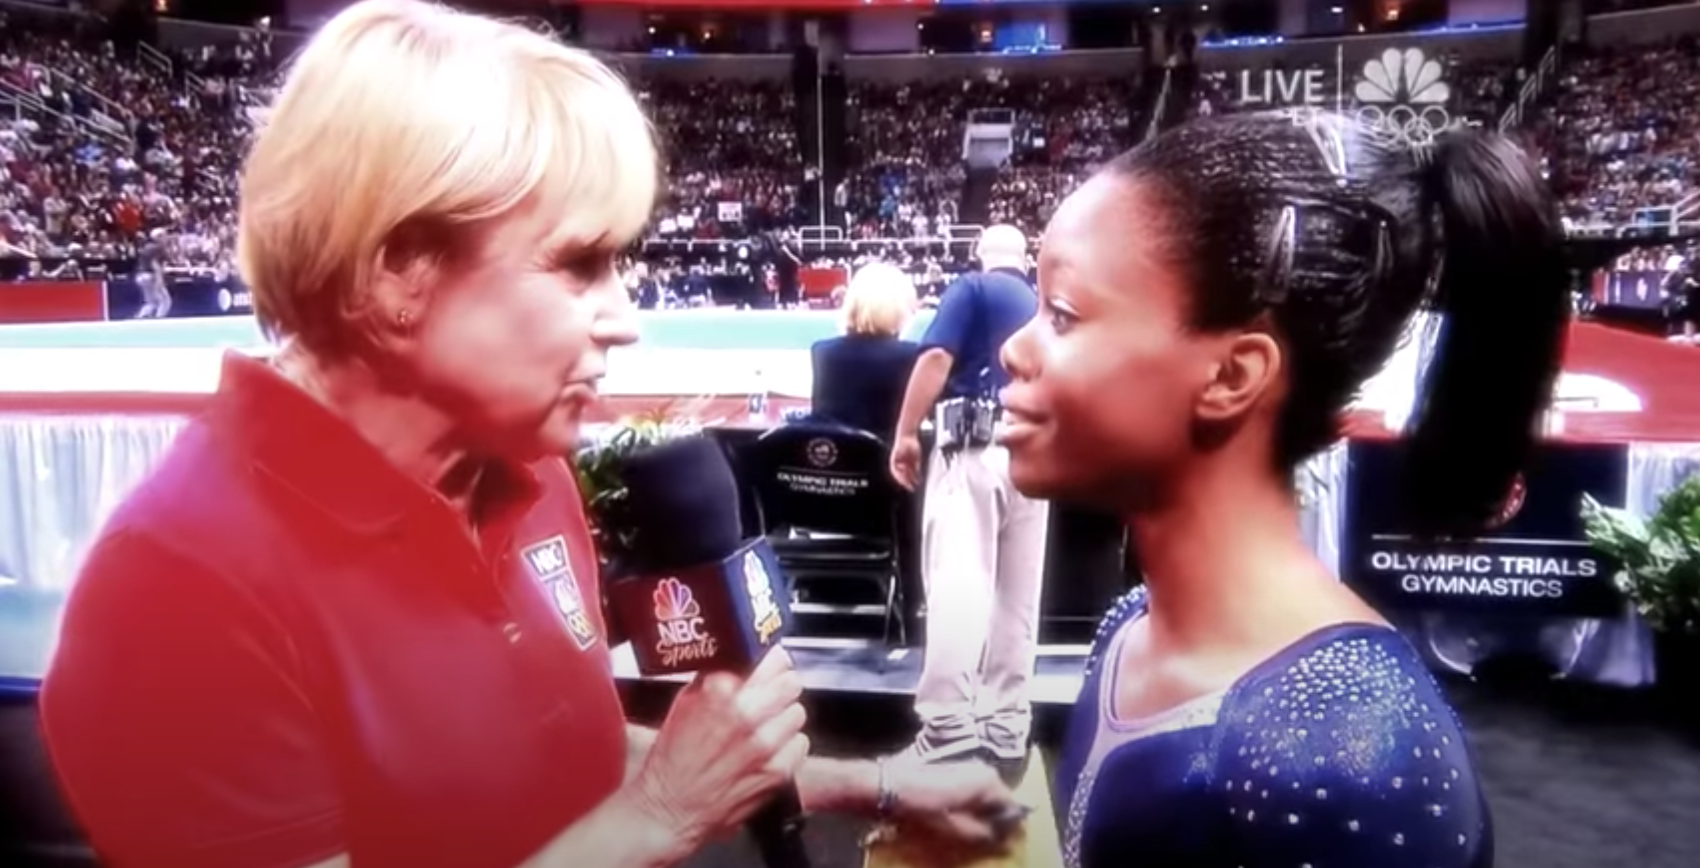 Gabby Douglas talks to an interview at the 2012 Olympic Trials